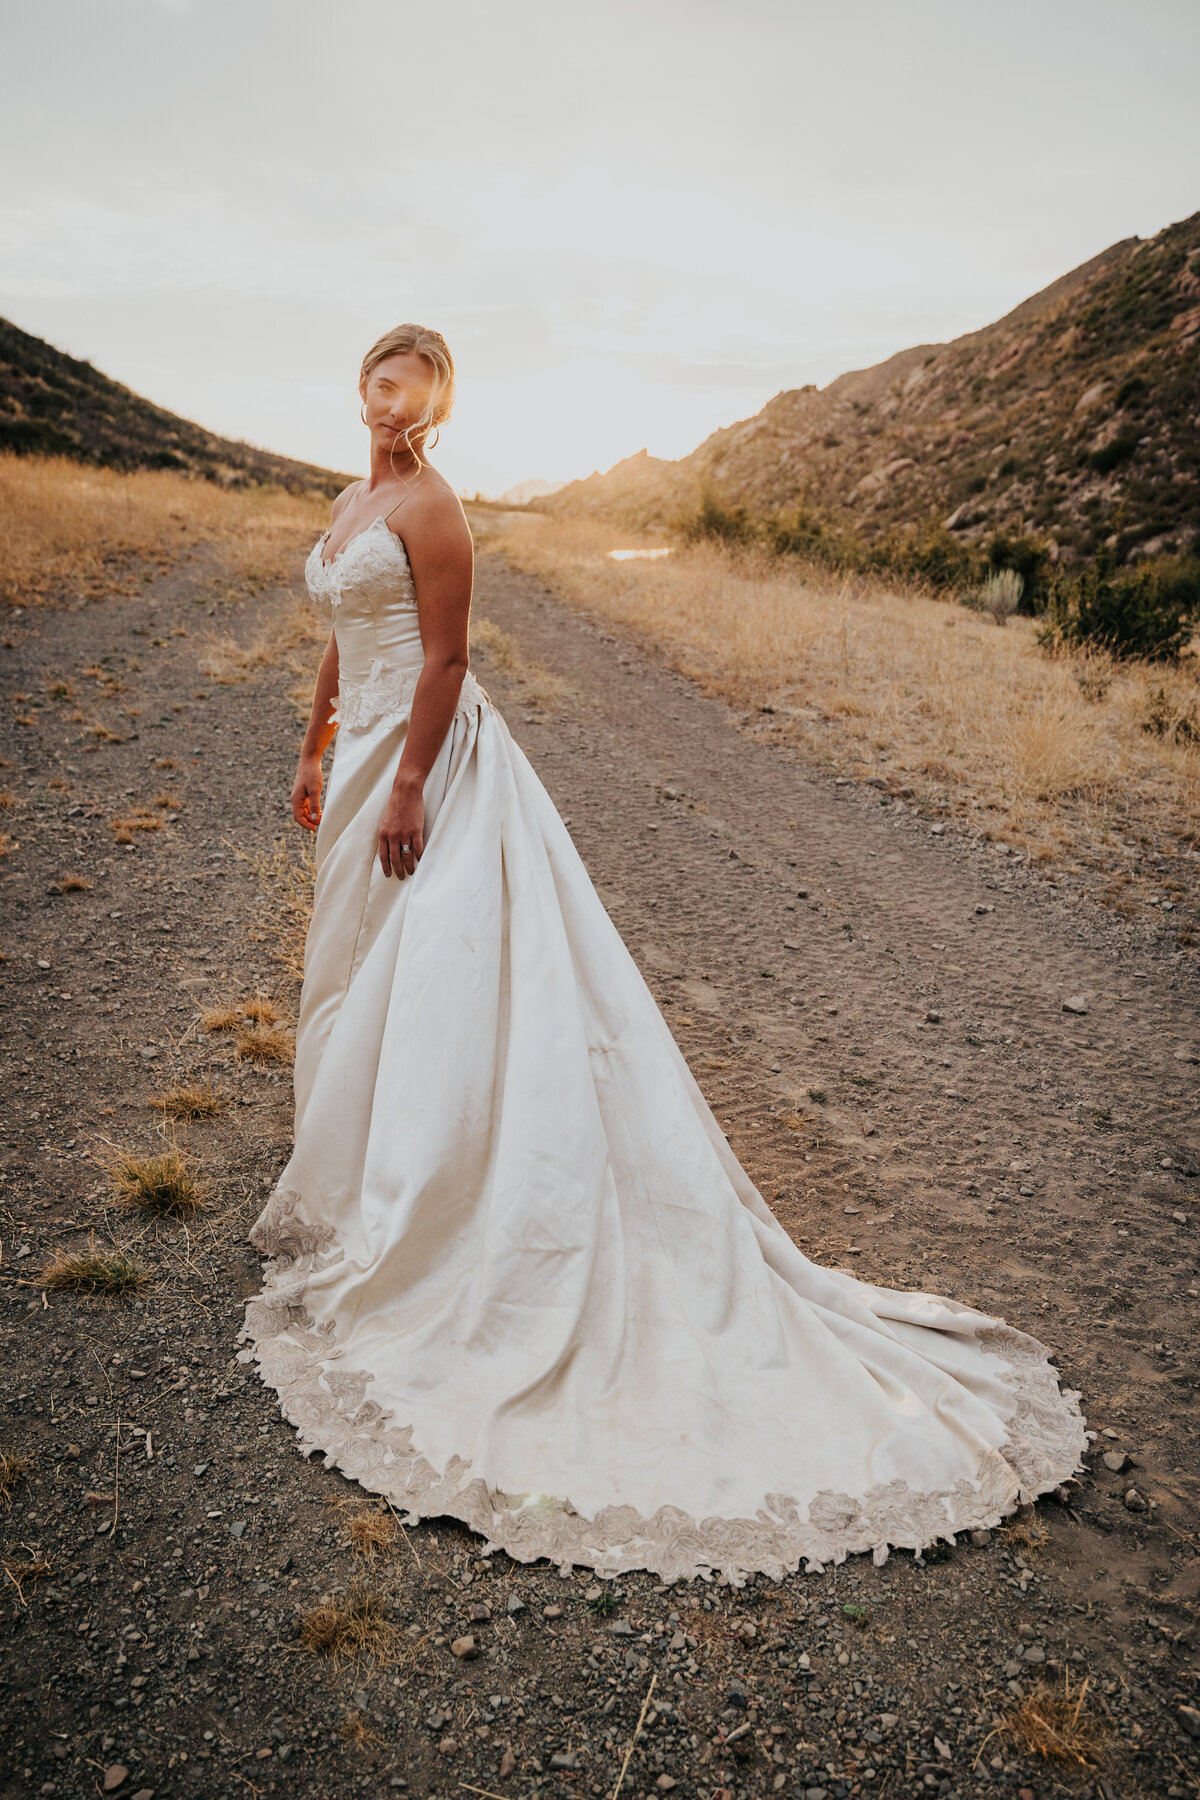 Bride stands in front of sunset while wind tousles her hair.